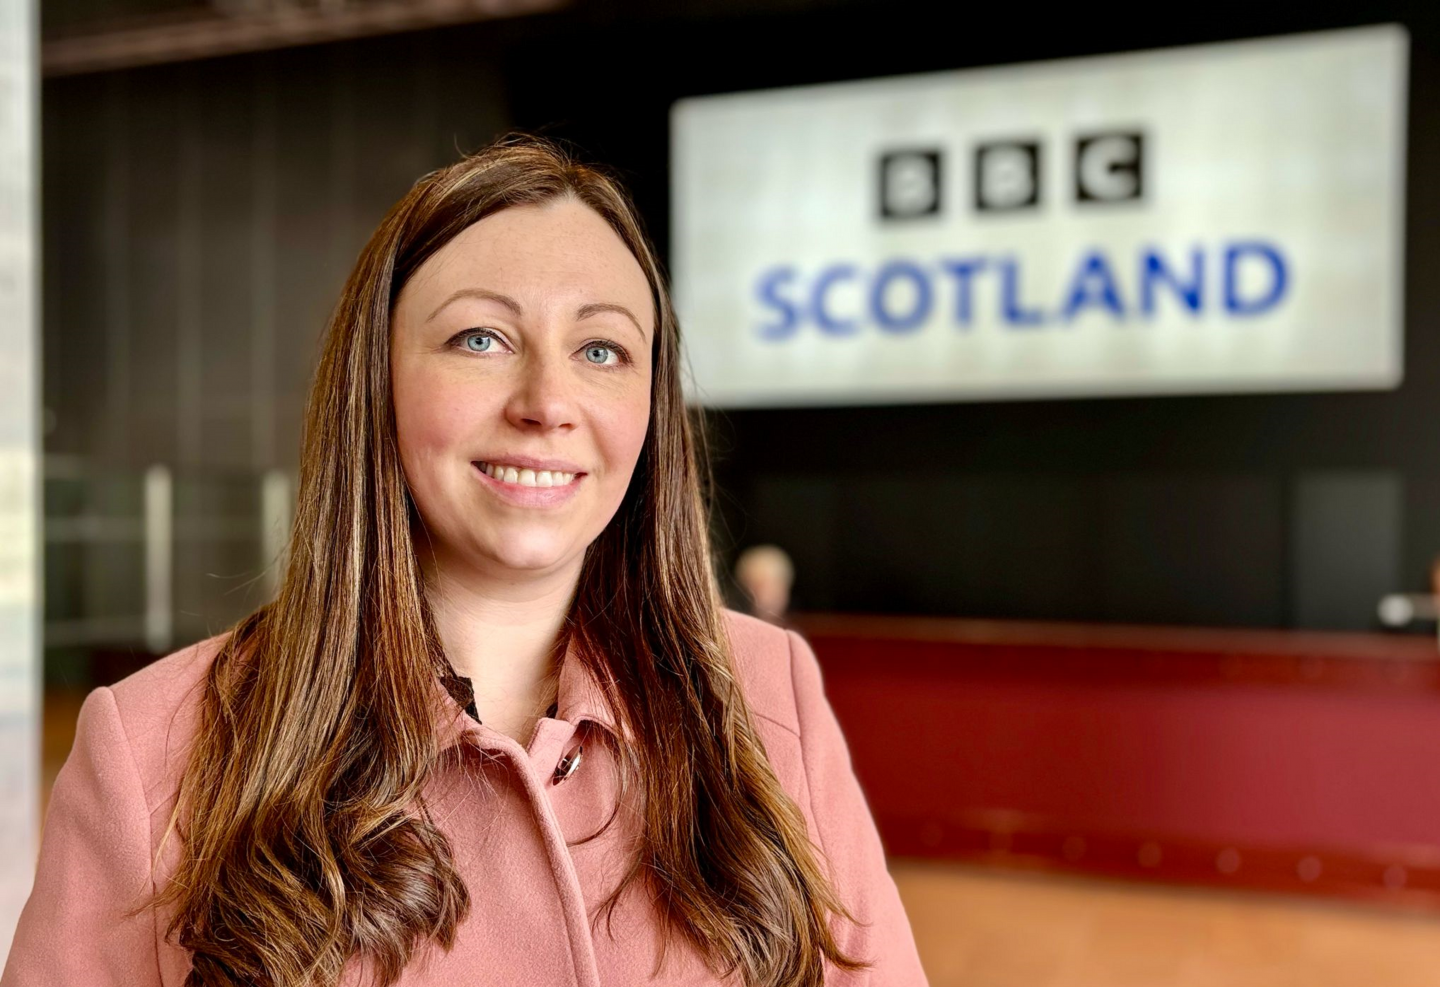 Emma Clifford Bell with BBC Scotland sign